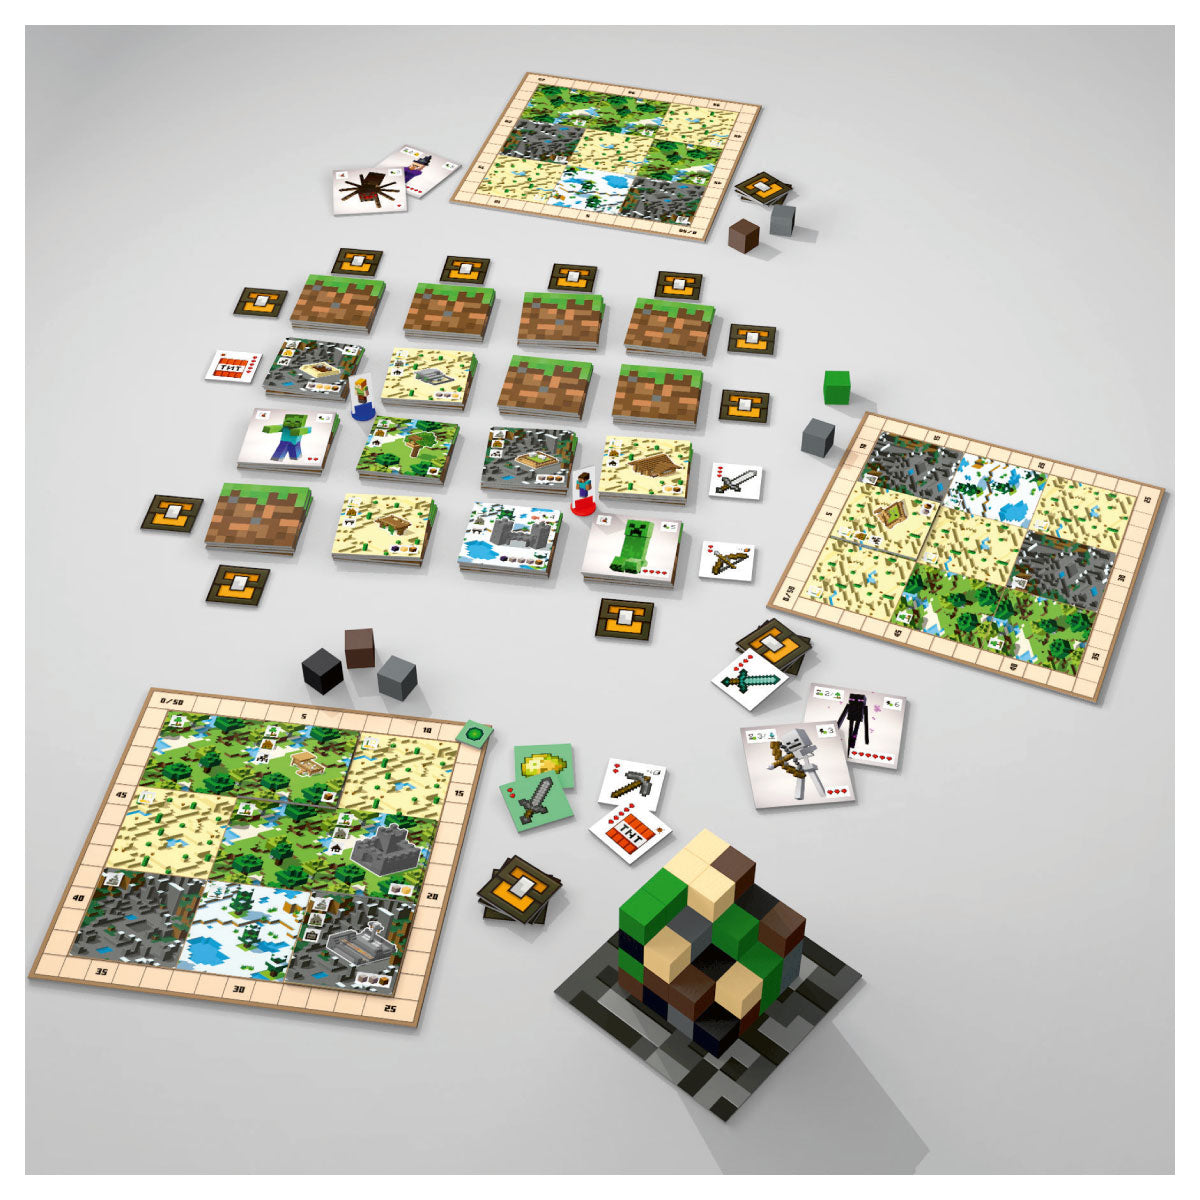 Minecraft Builders & Biomes from Ravensburger